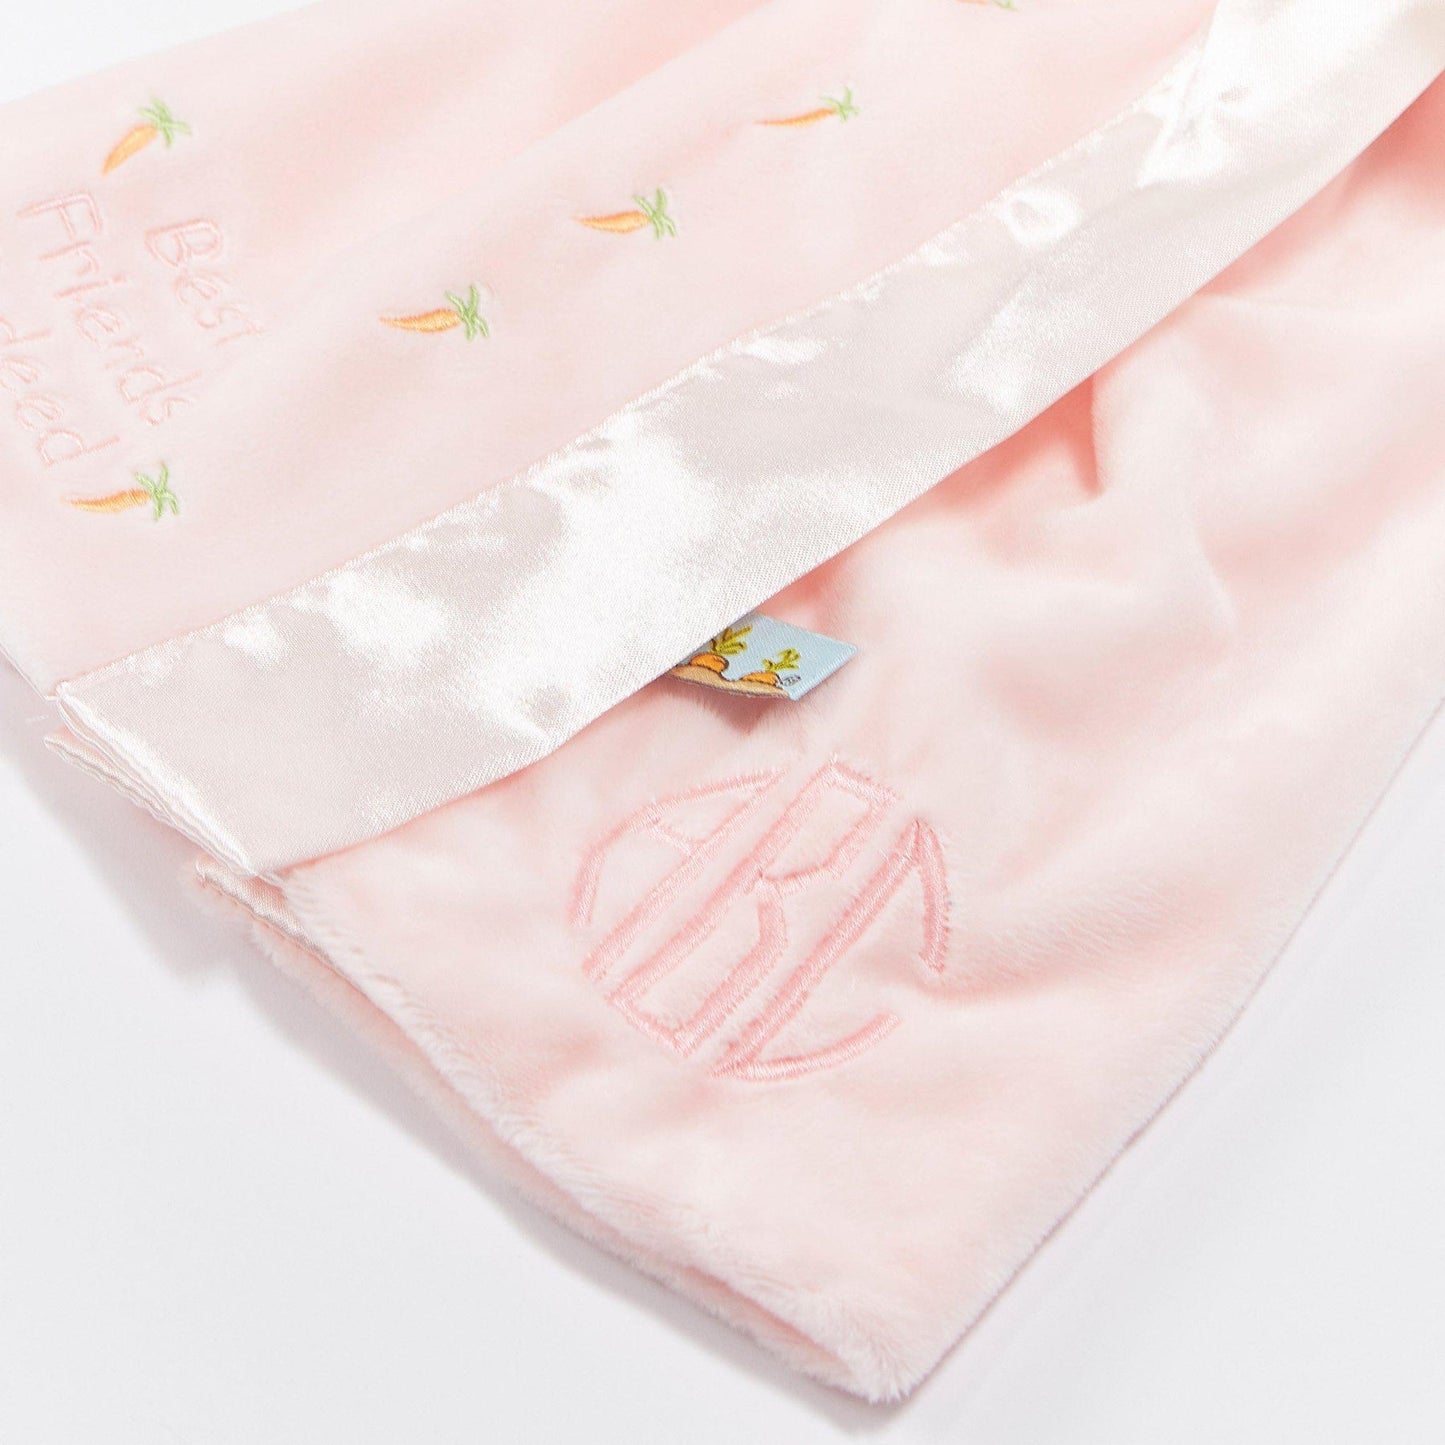 Baby's pink bunny lovey blanket - Blossom Buddy blanket - Bunnies by the Bay